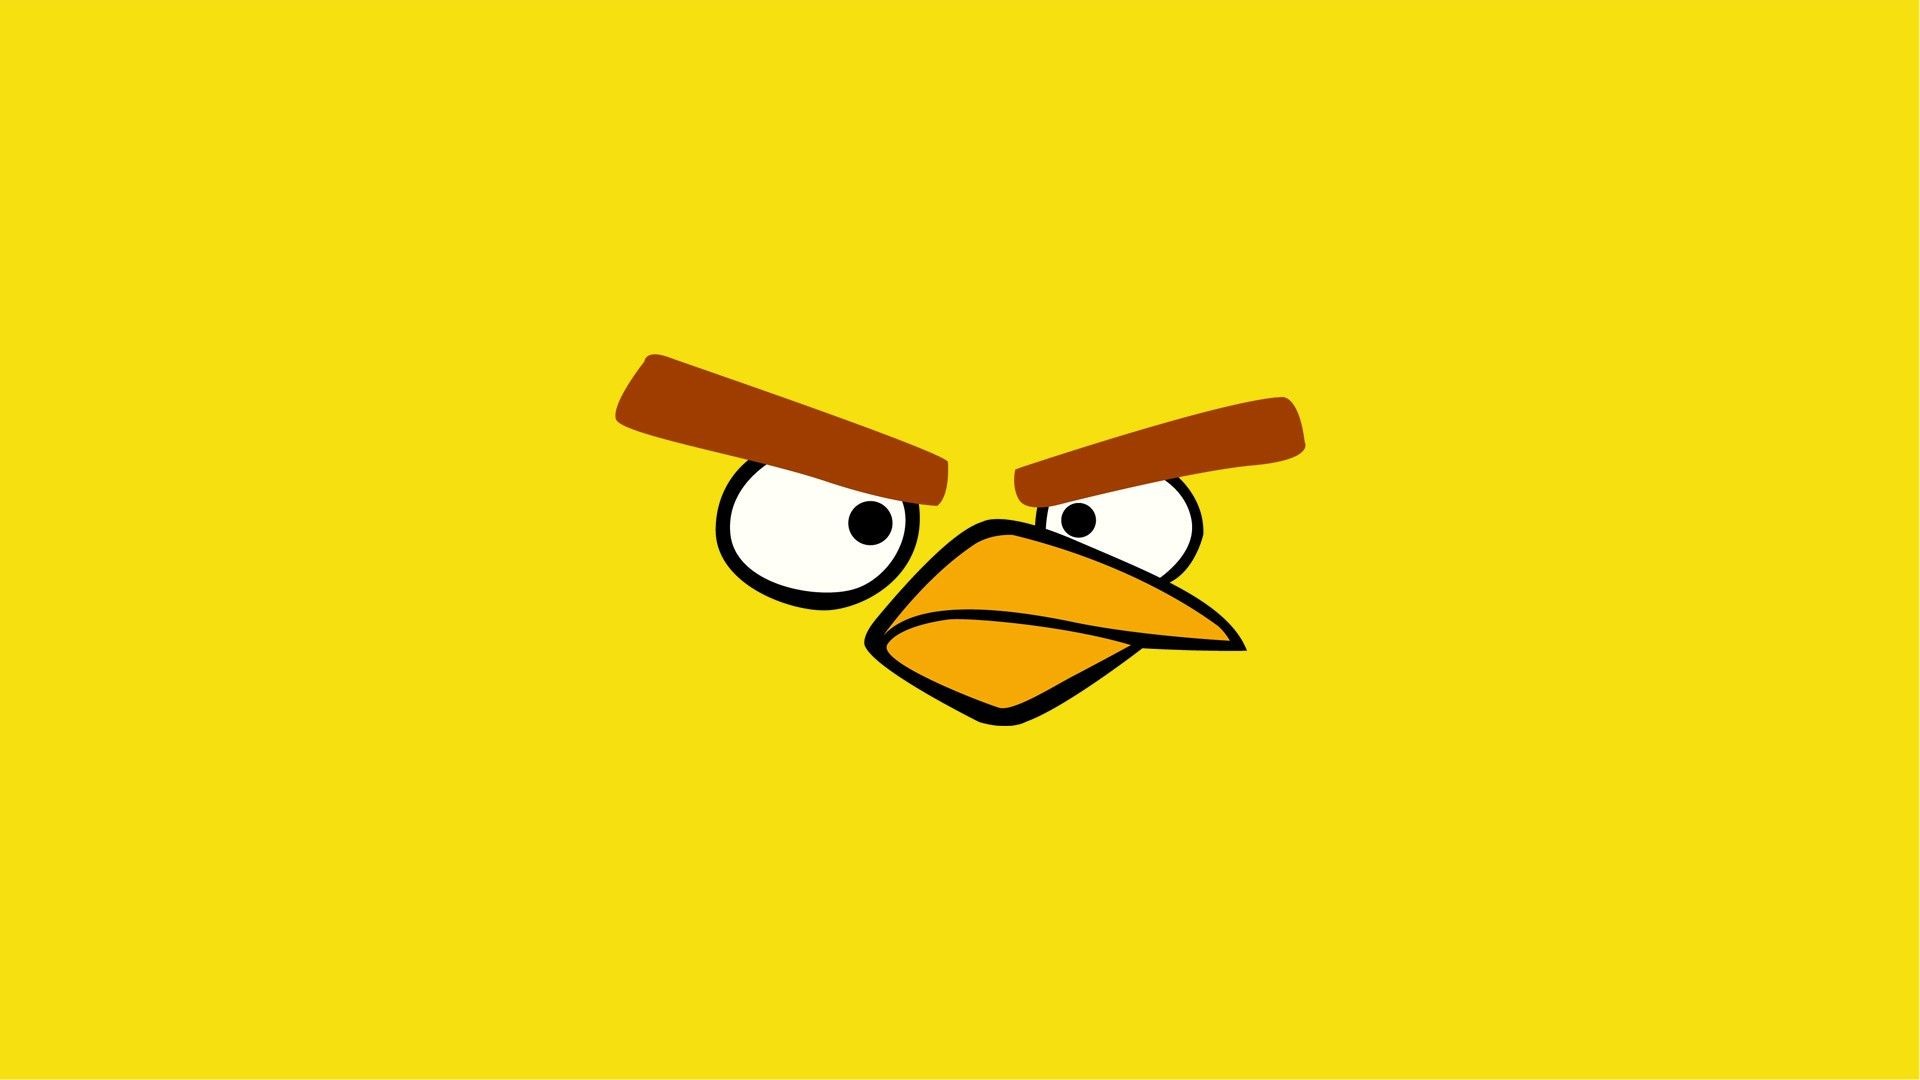 General 1920x1080 Angry Birds cartoon minimalism yellow background simple background video games